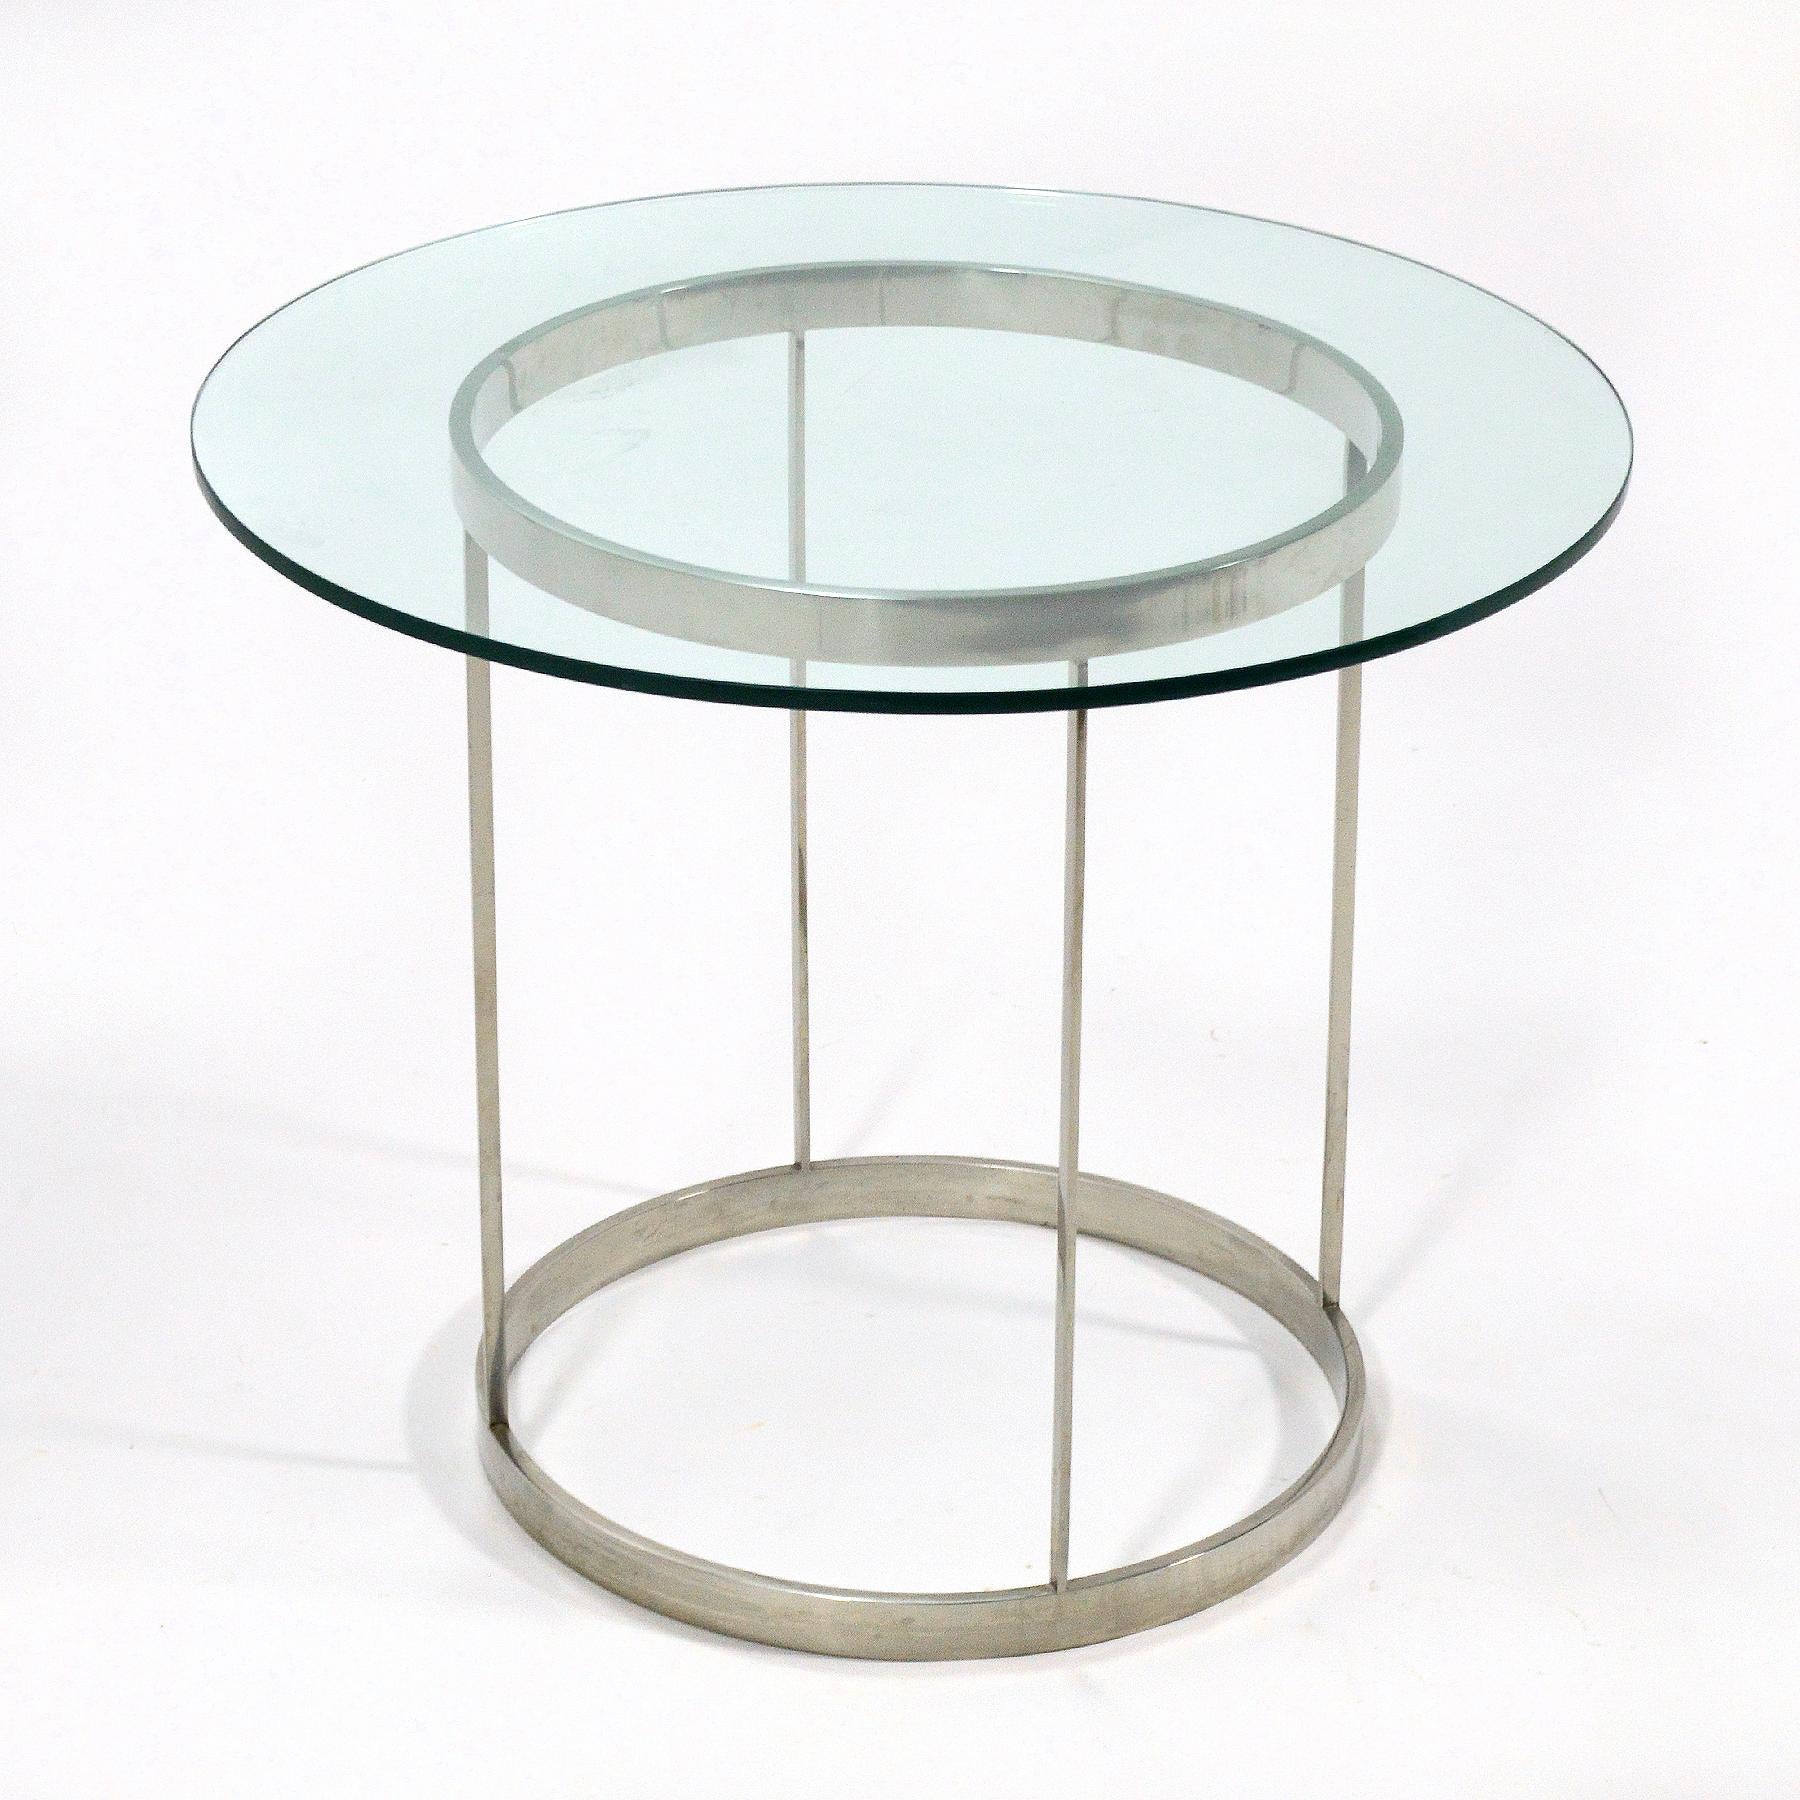 We love this exceptional table. We love the simplicity and honesty of the materials, we love the expert craftsmanship, and most of all we love the elegant, Minimalist design. It was fabricated by Metalworks as part of a custom commission suite of